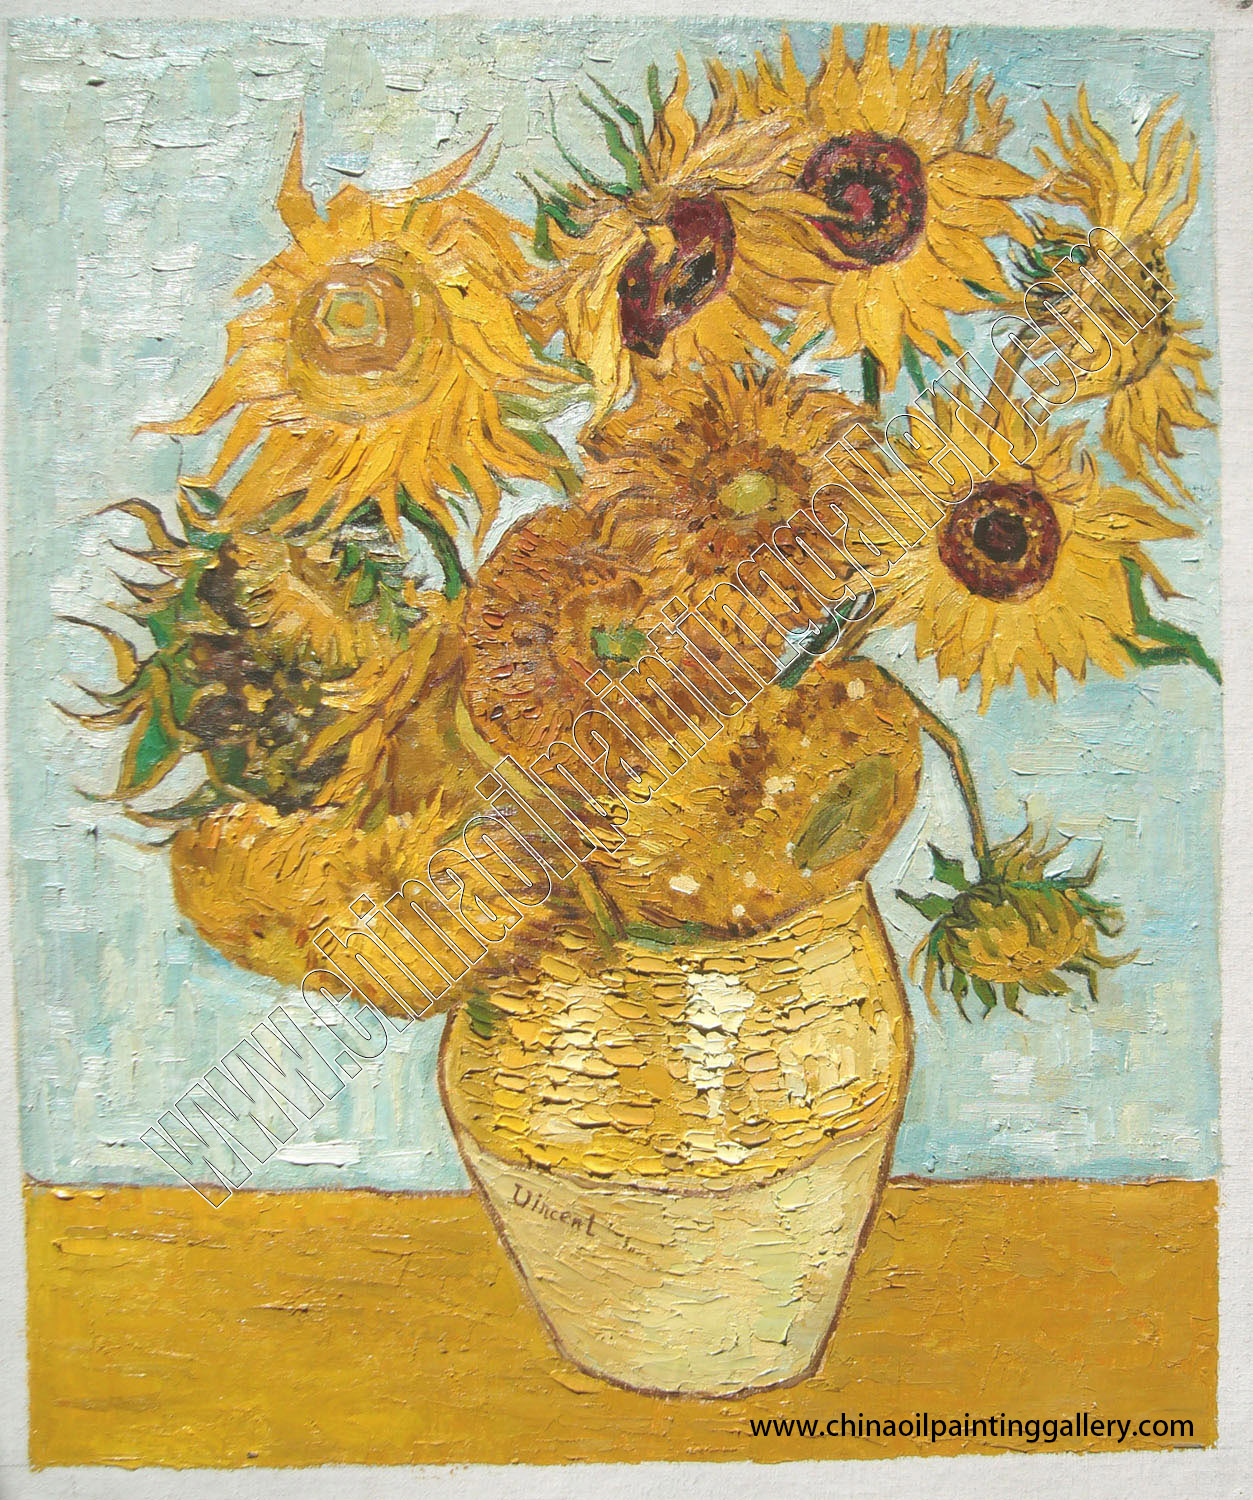 Vincent van Gogh Sunflowers - Oil painting reproductions 21